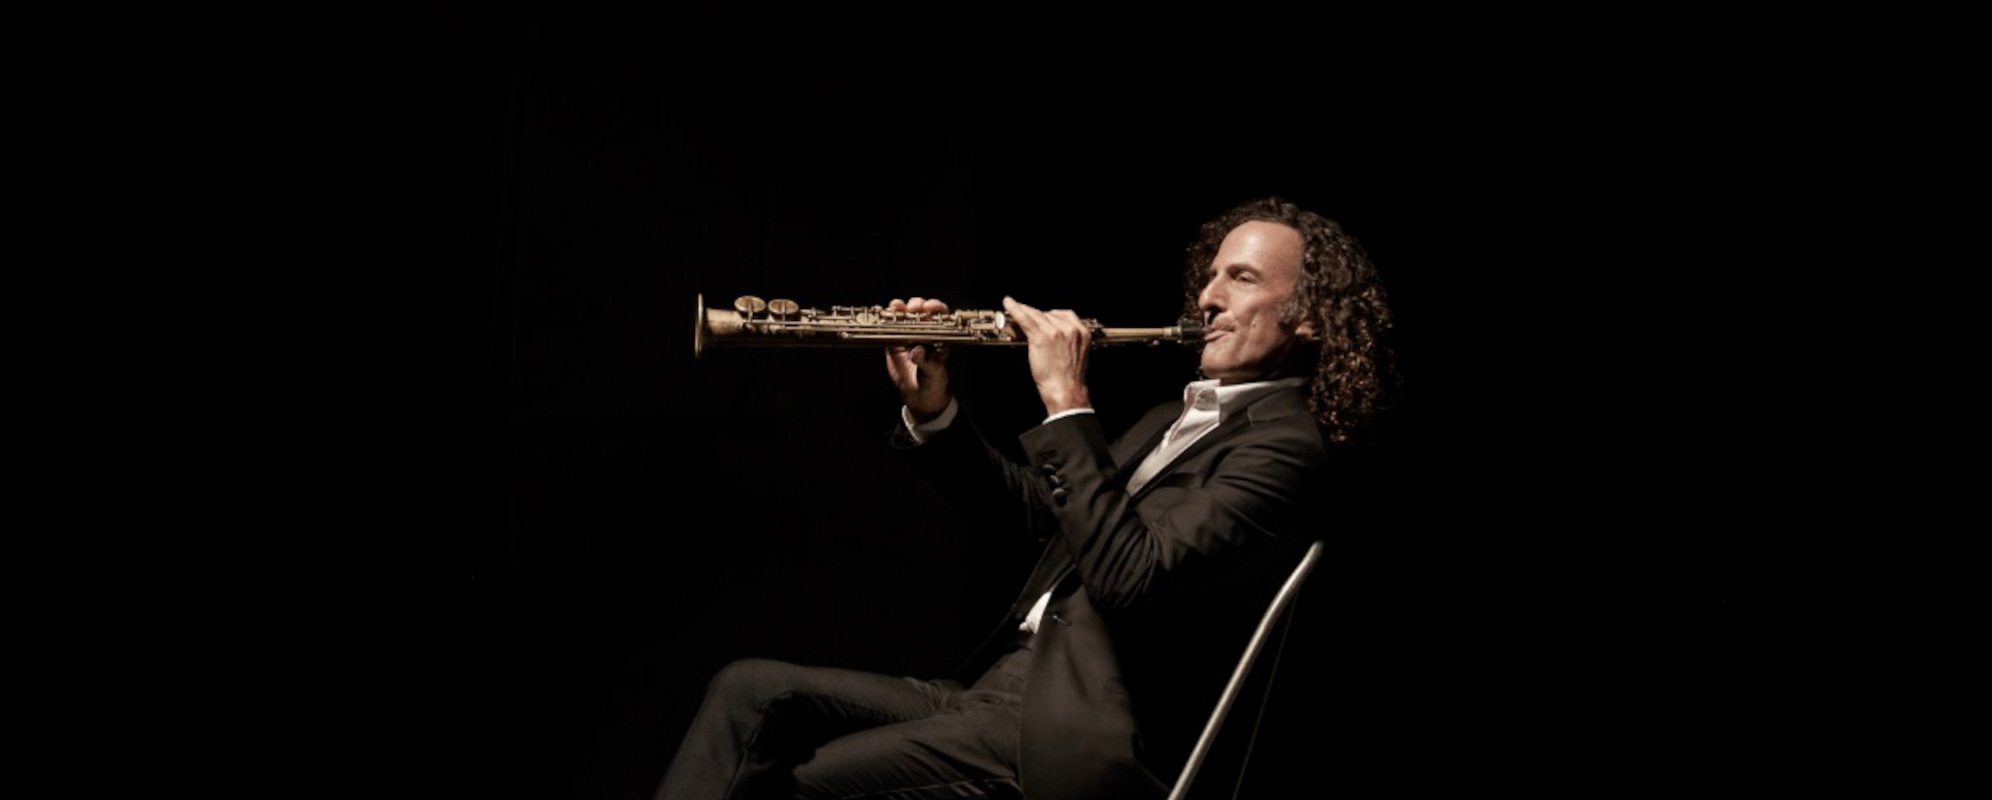 Exclusive: Kenny G Tells the Story Behind New Single, “Emeline”